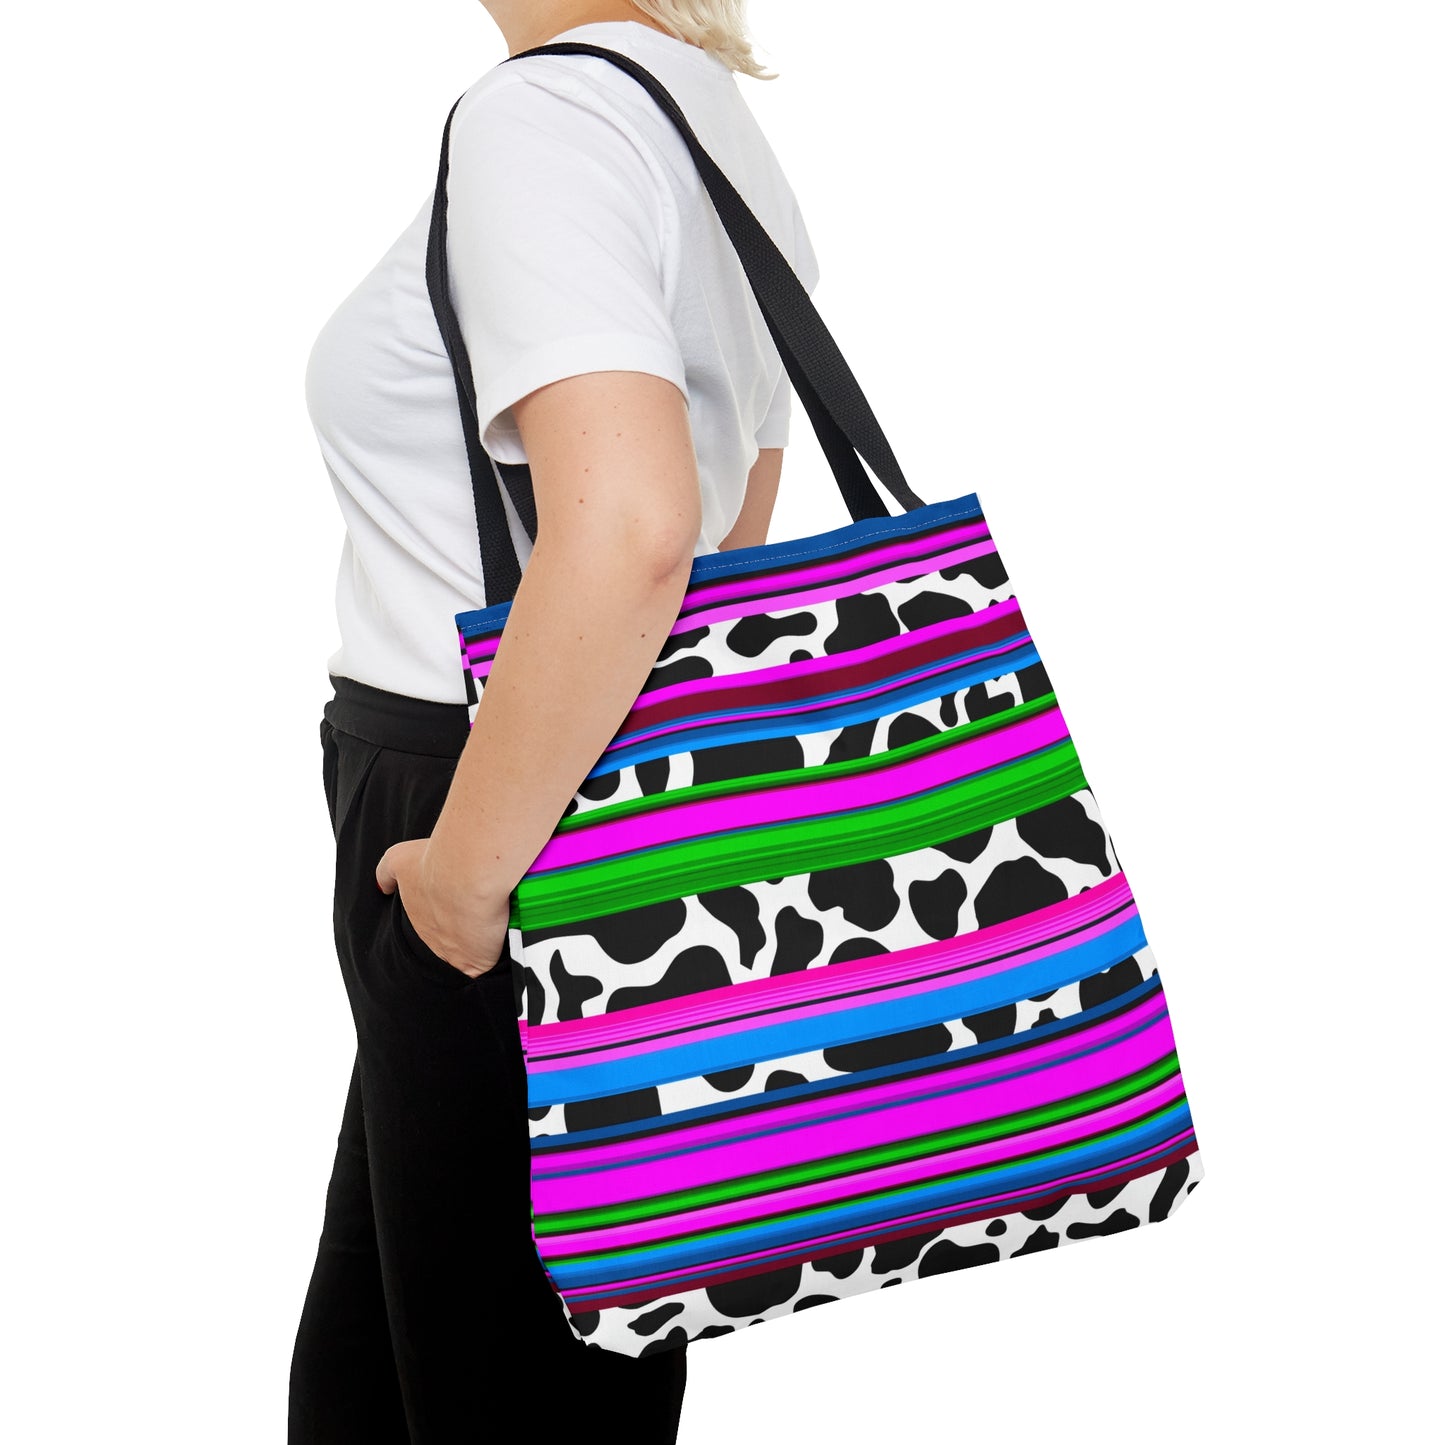 Colorful Cow and Serape Print Tote Bag, Tote Bag, Book Bag, Grocery Bag, Shoulder Bag, Gifts For Her, Gifts For Teacher, Mom Gifts, Tote